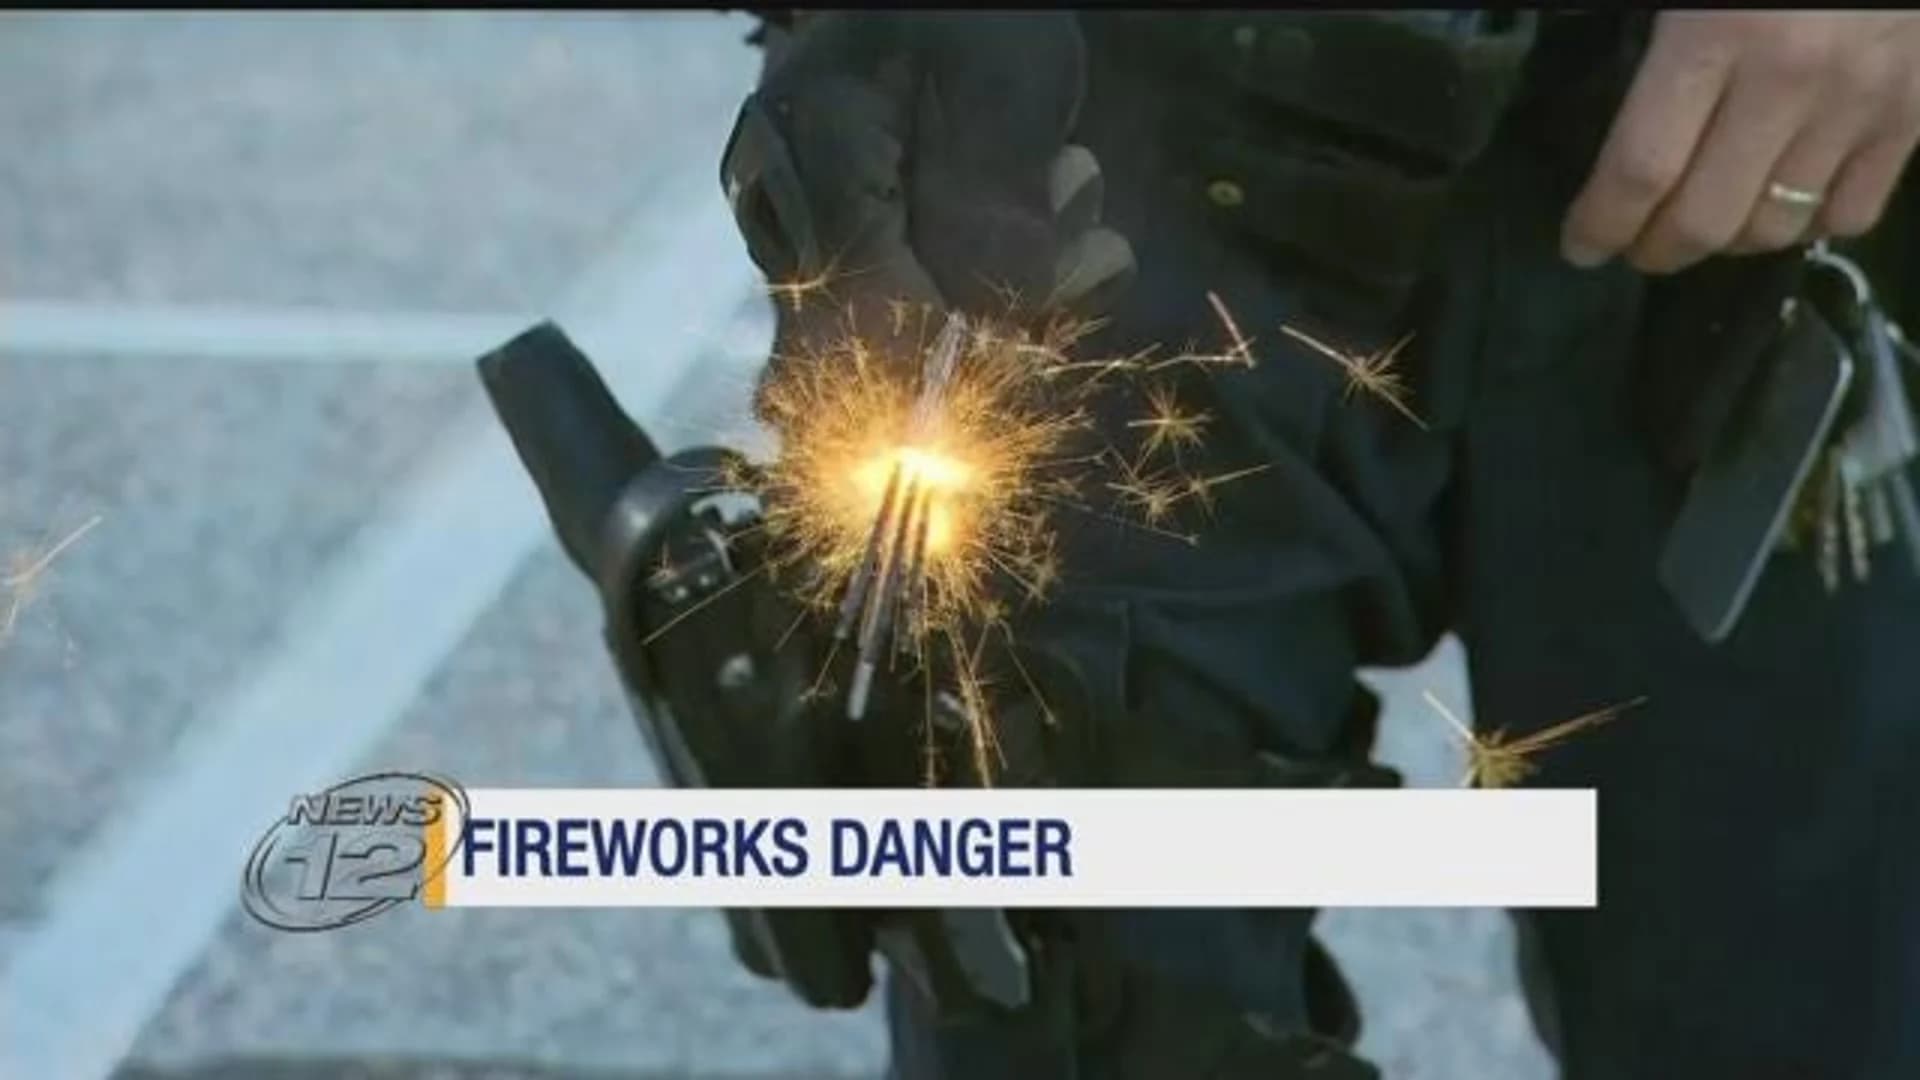 Fireworks safety: How to prevent injuries, fires